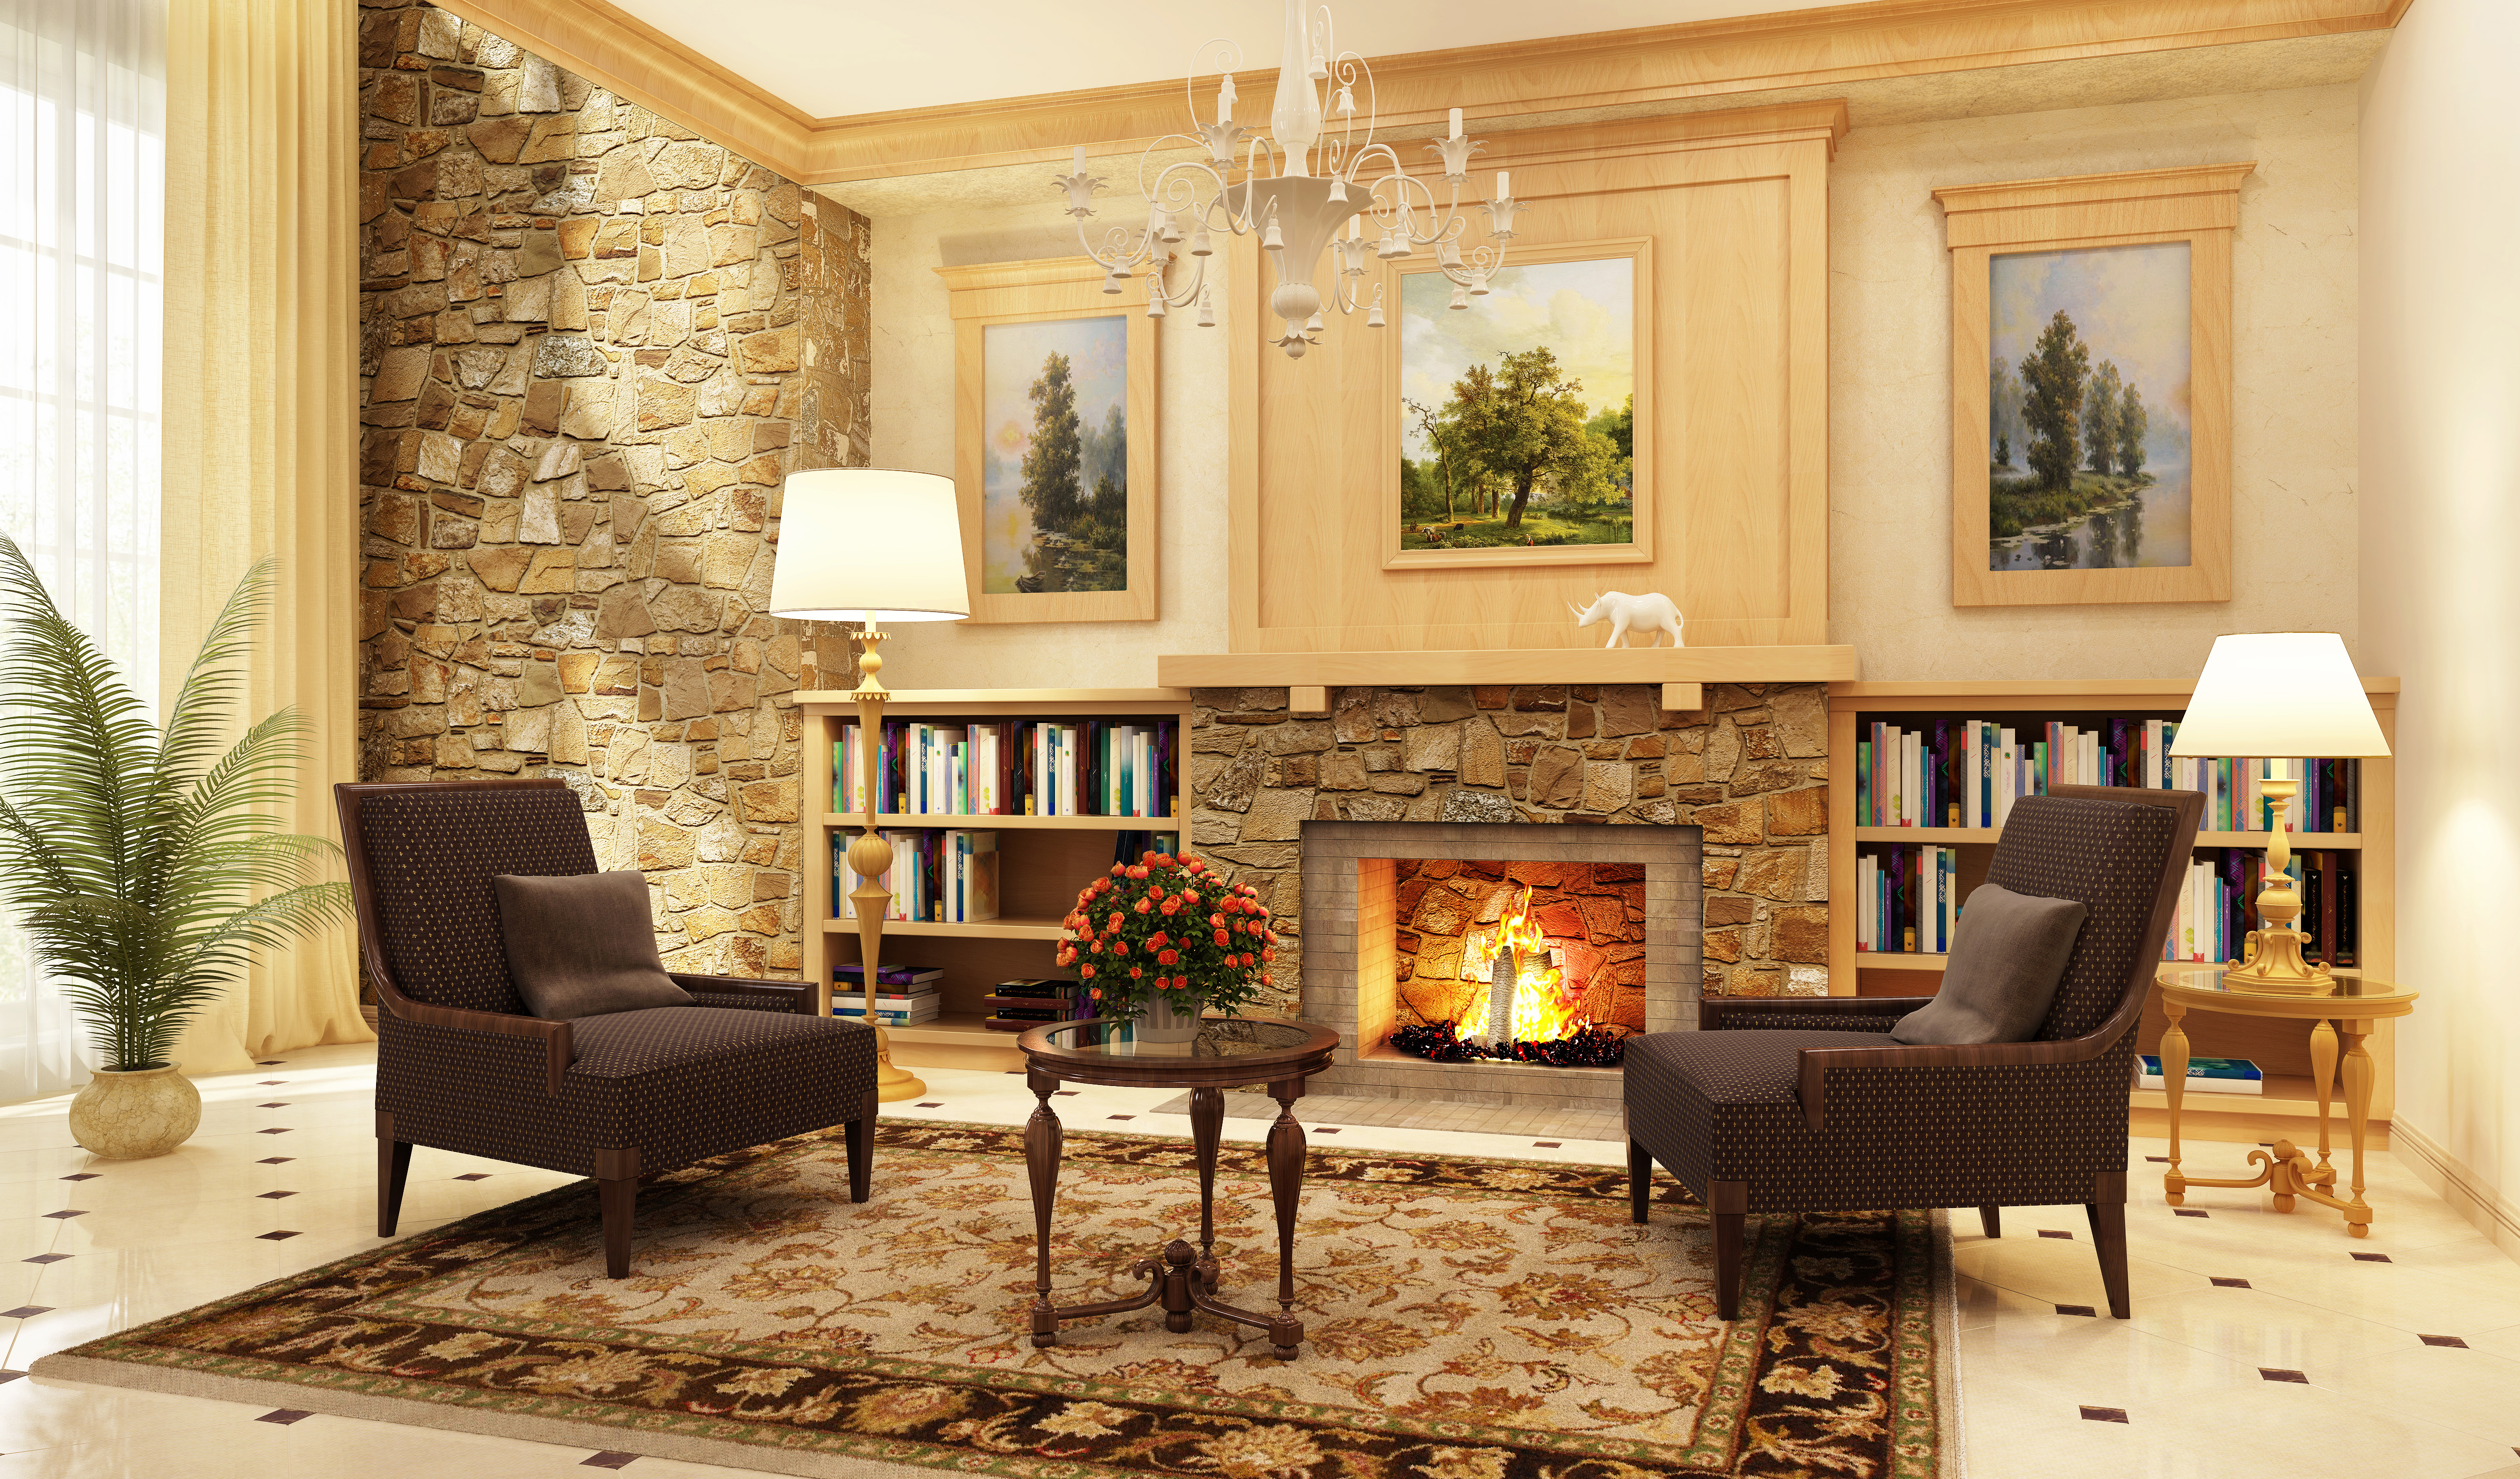 Fireplace and decor for model home